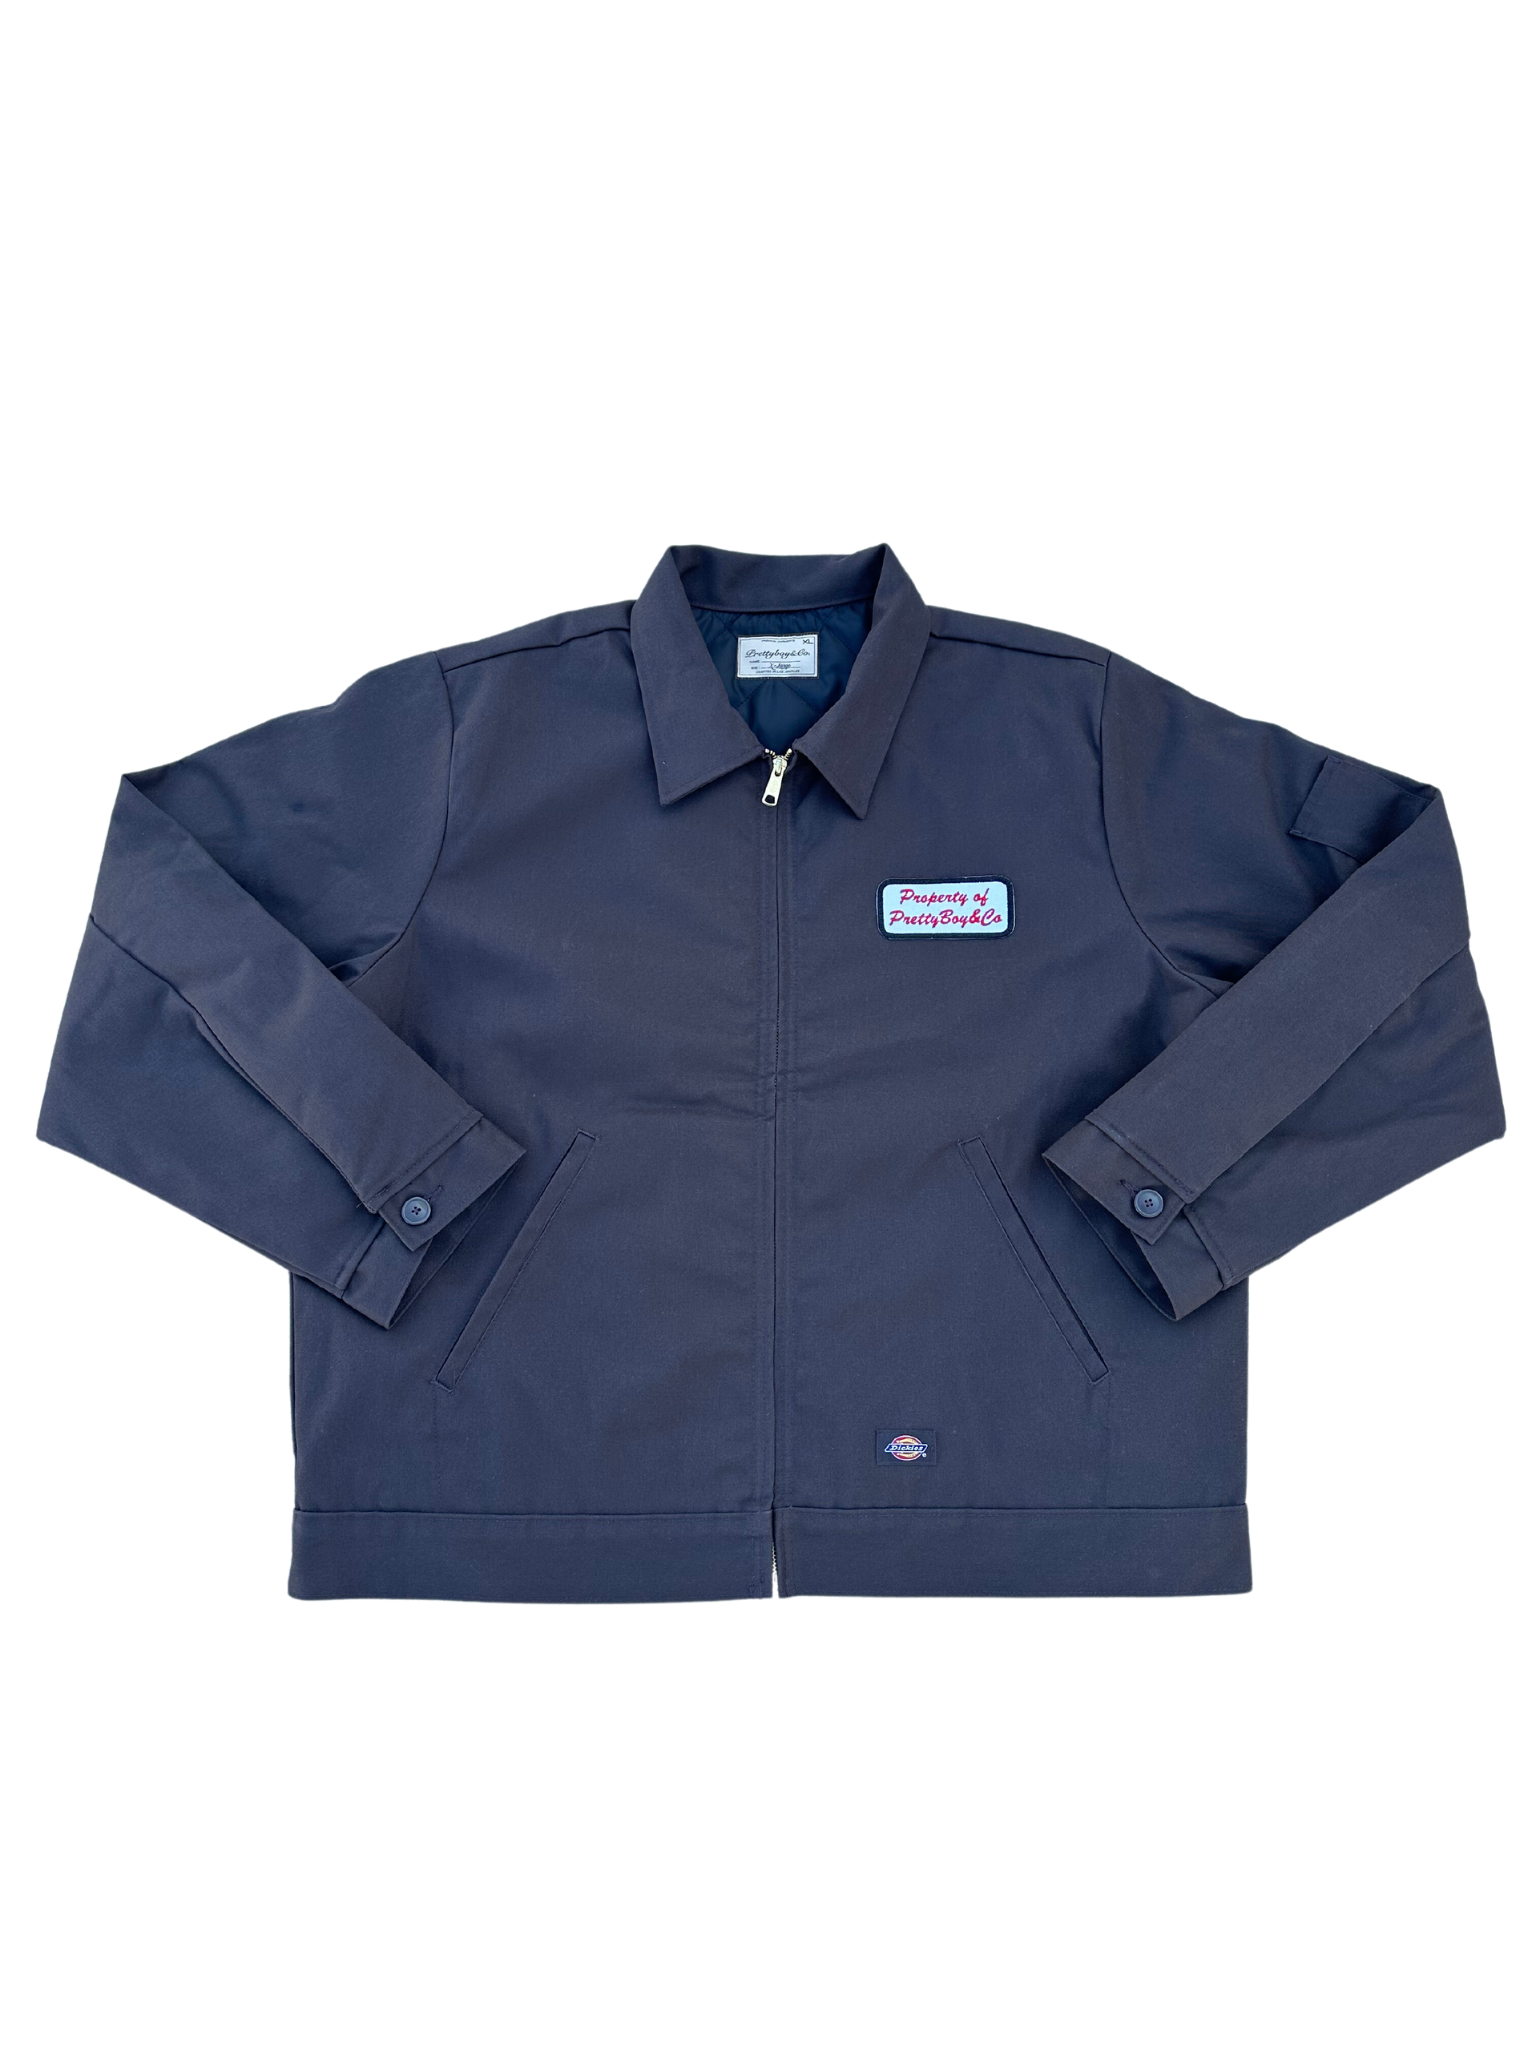 Property of PBC Workwear Jacket (ALL Colors)